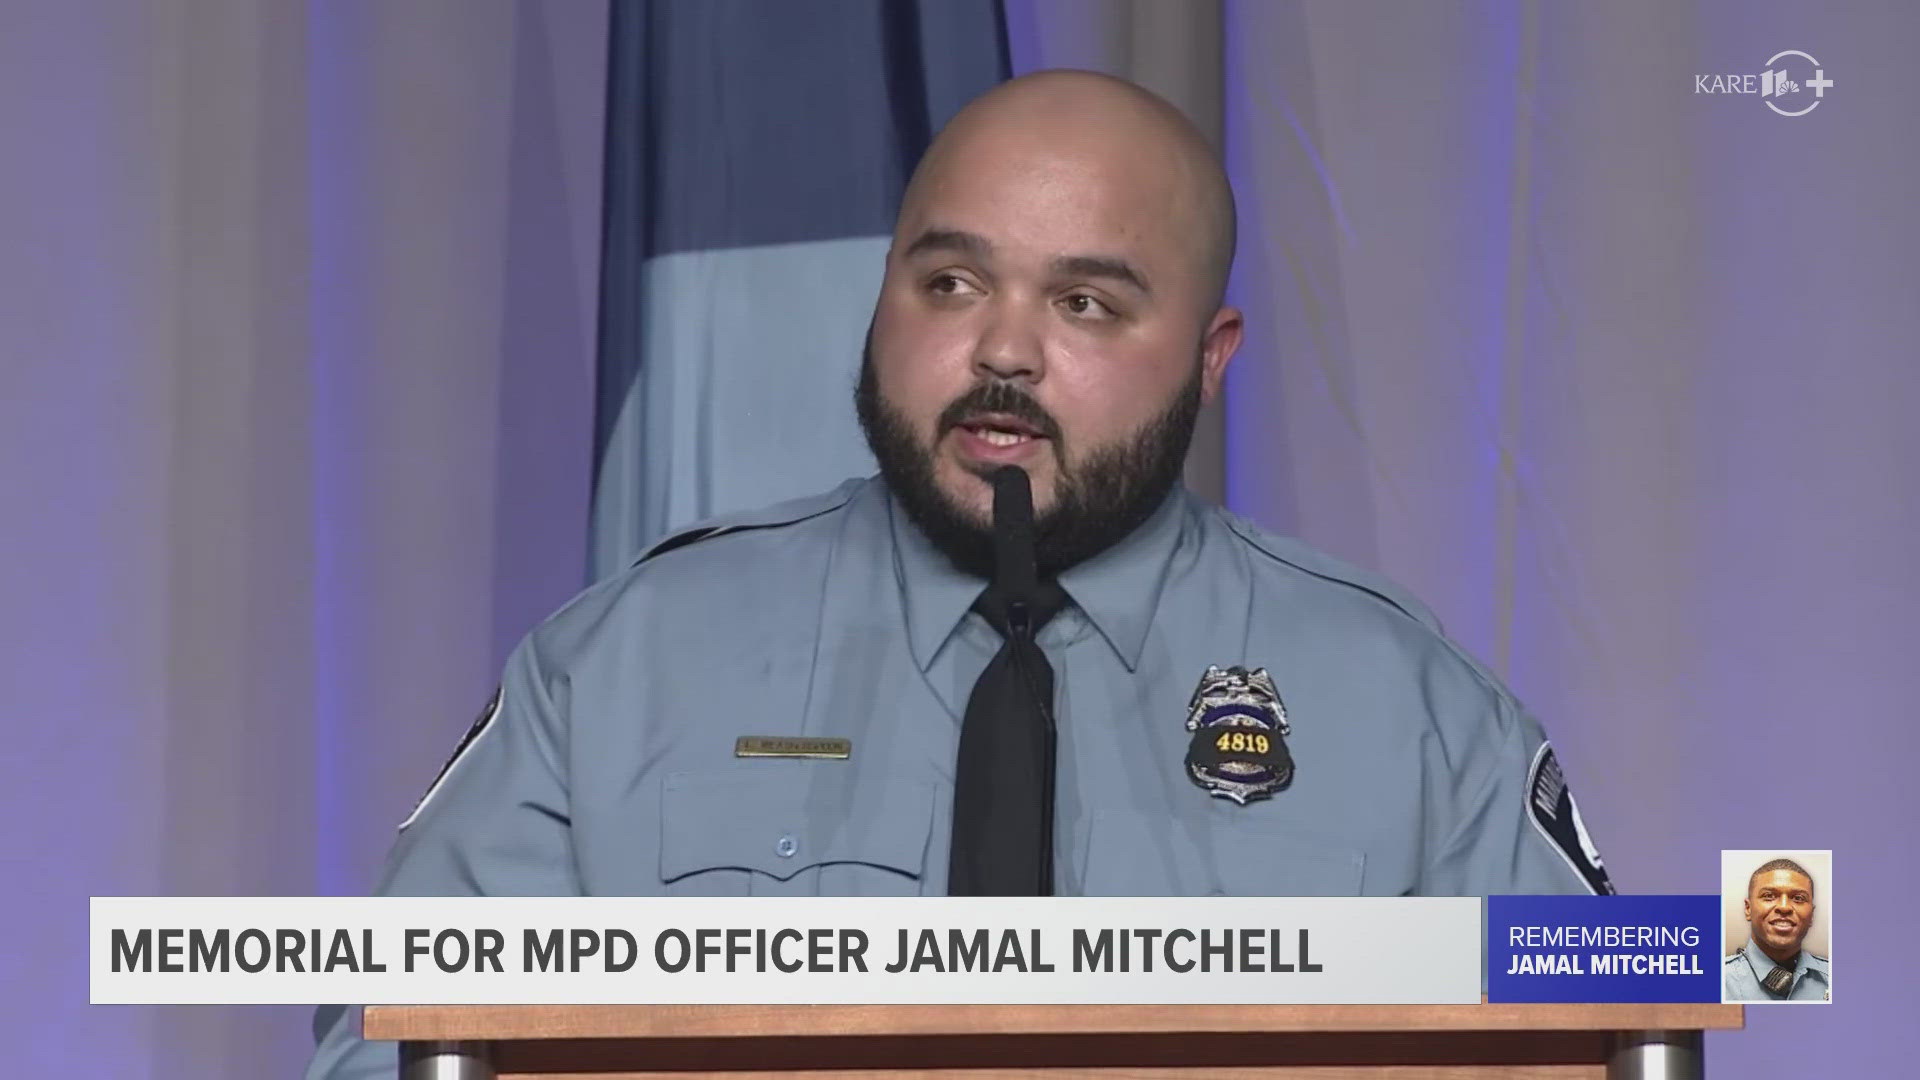 "He was the hero that the city of Minneapolis needed," Weatherspoon told mourners at Officer Jamal Mitchell's funeral.